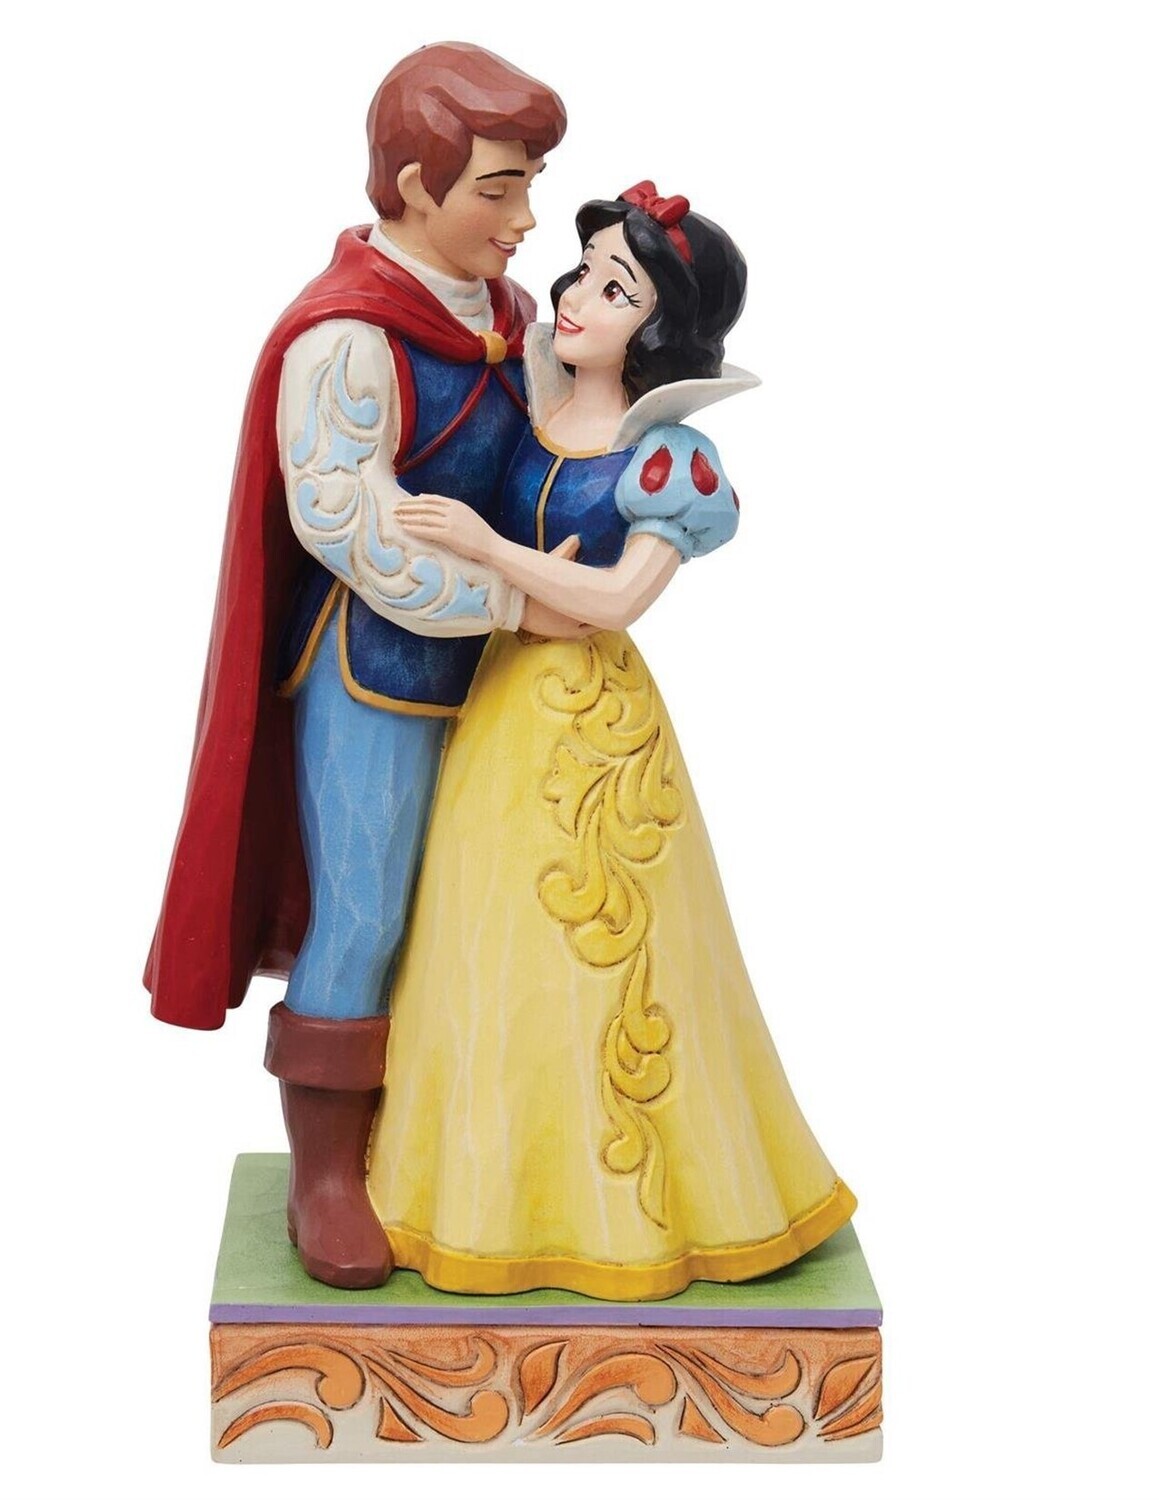 Jim Shore Disney Traditions "The Fairest Love" Snow White & her Prince Figurine (6013069)